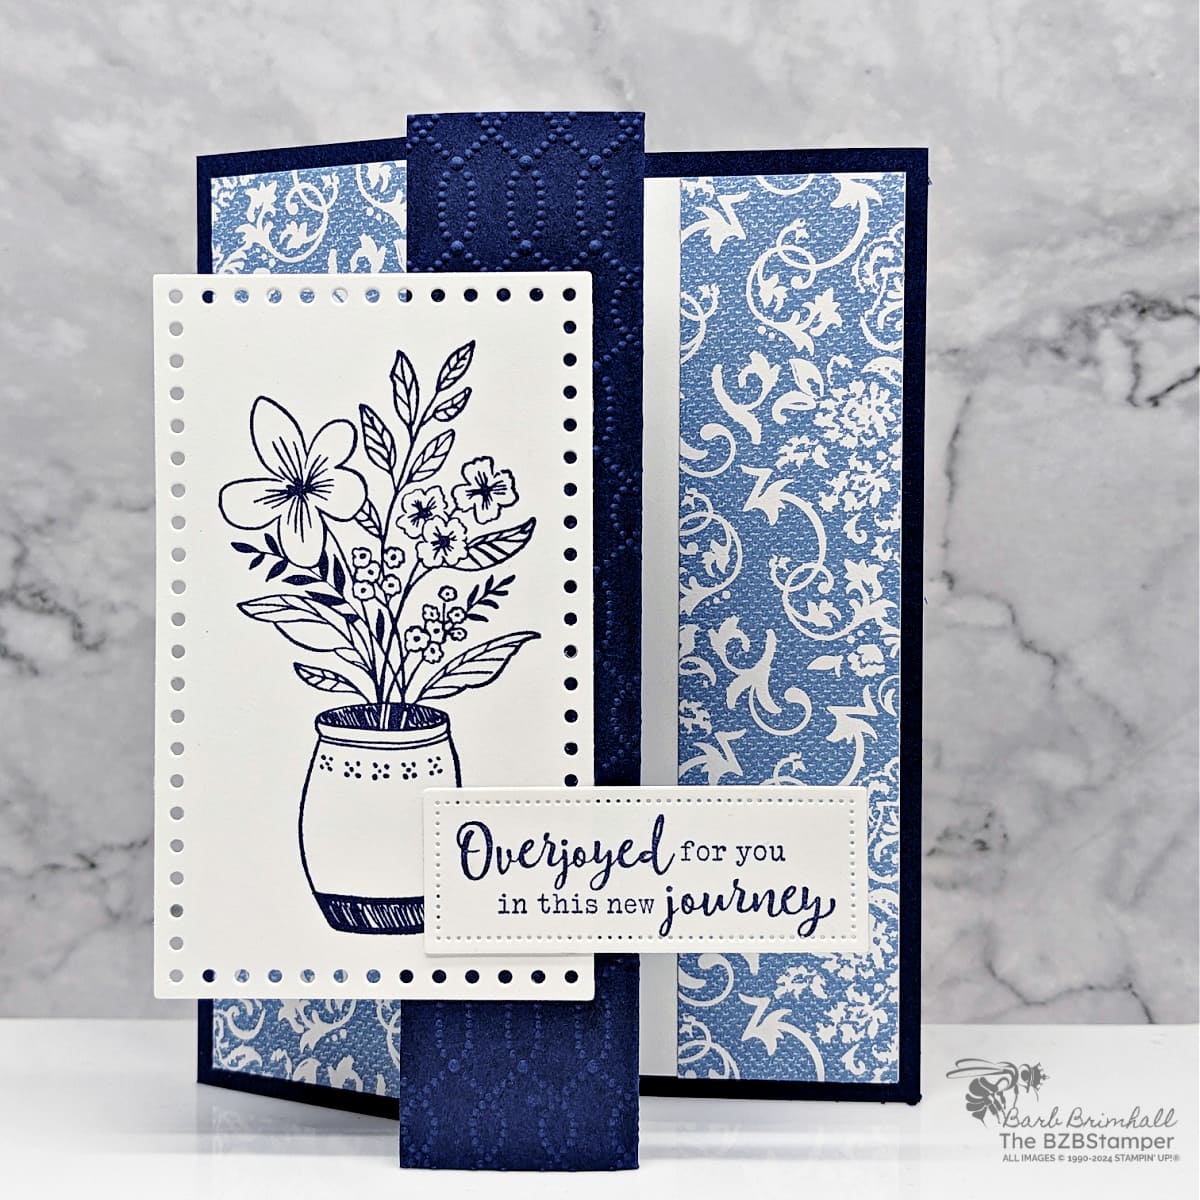 Everyday Details Fun Fold Card in a monochromatic navy blue color scheme.   The focal image is a vase with flowers and a generic all-occasion sentiment.